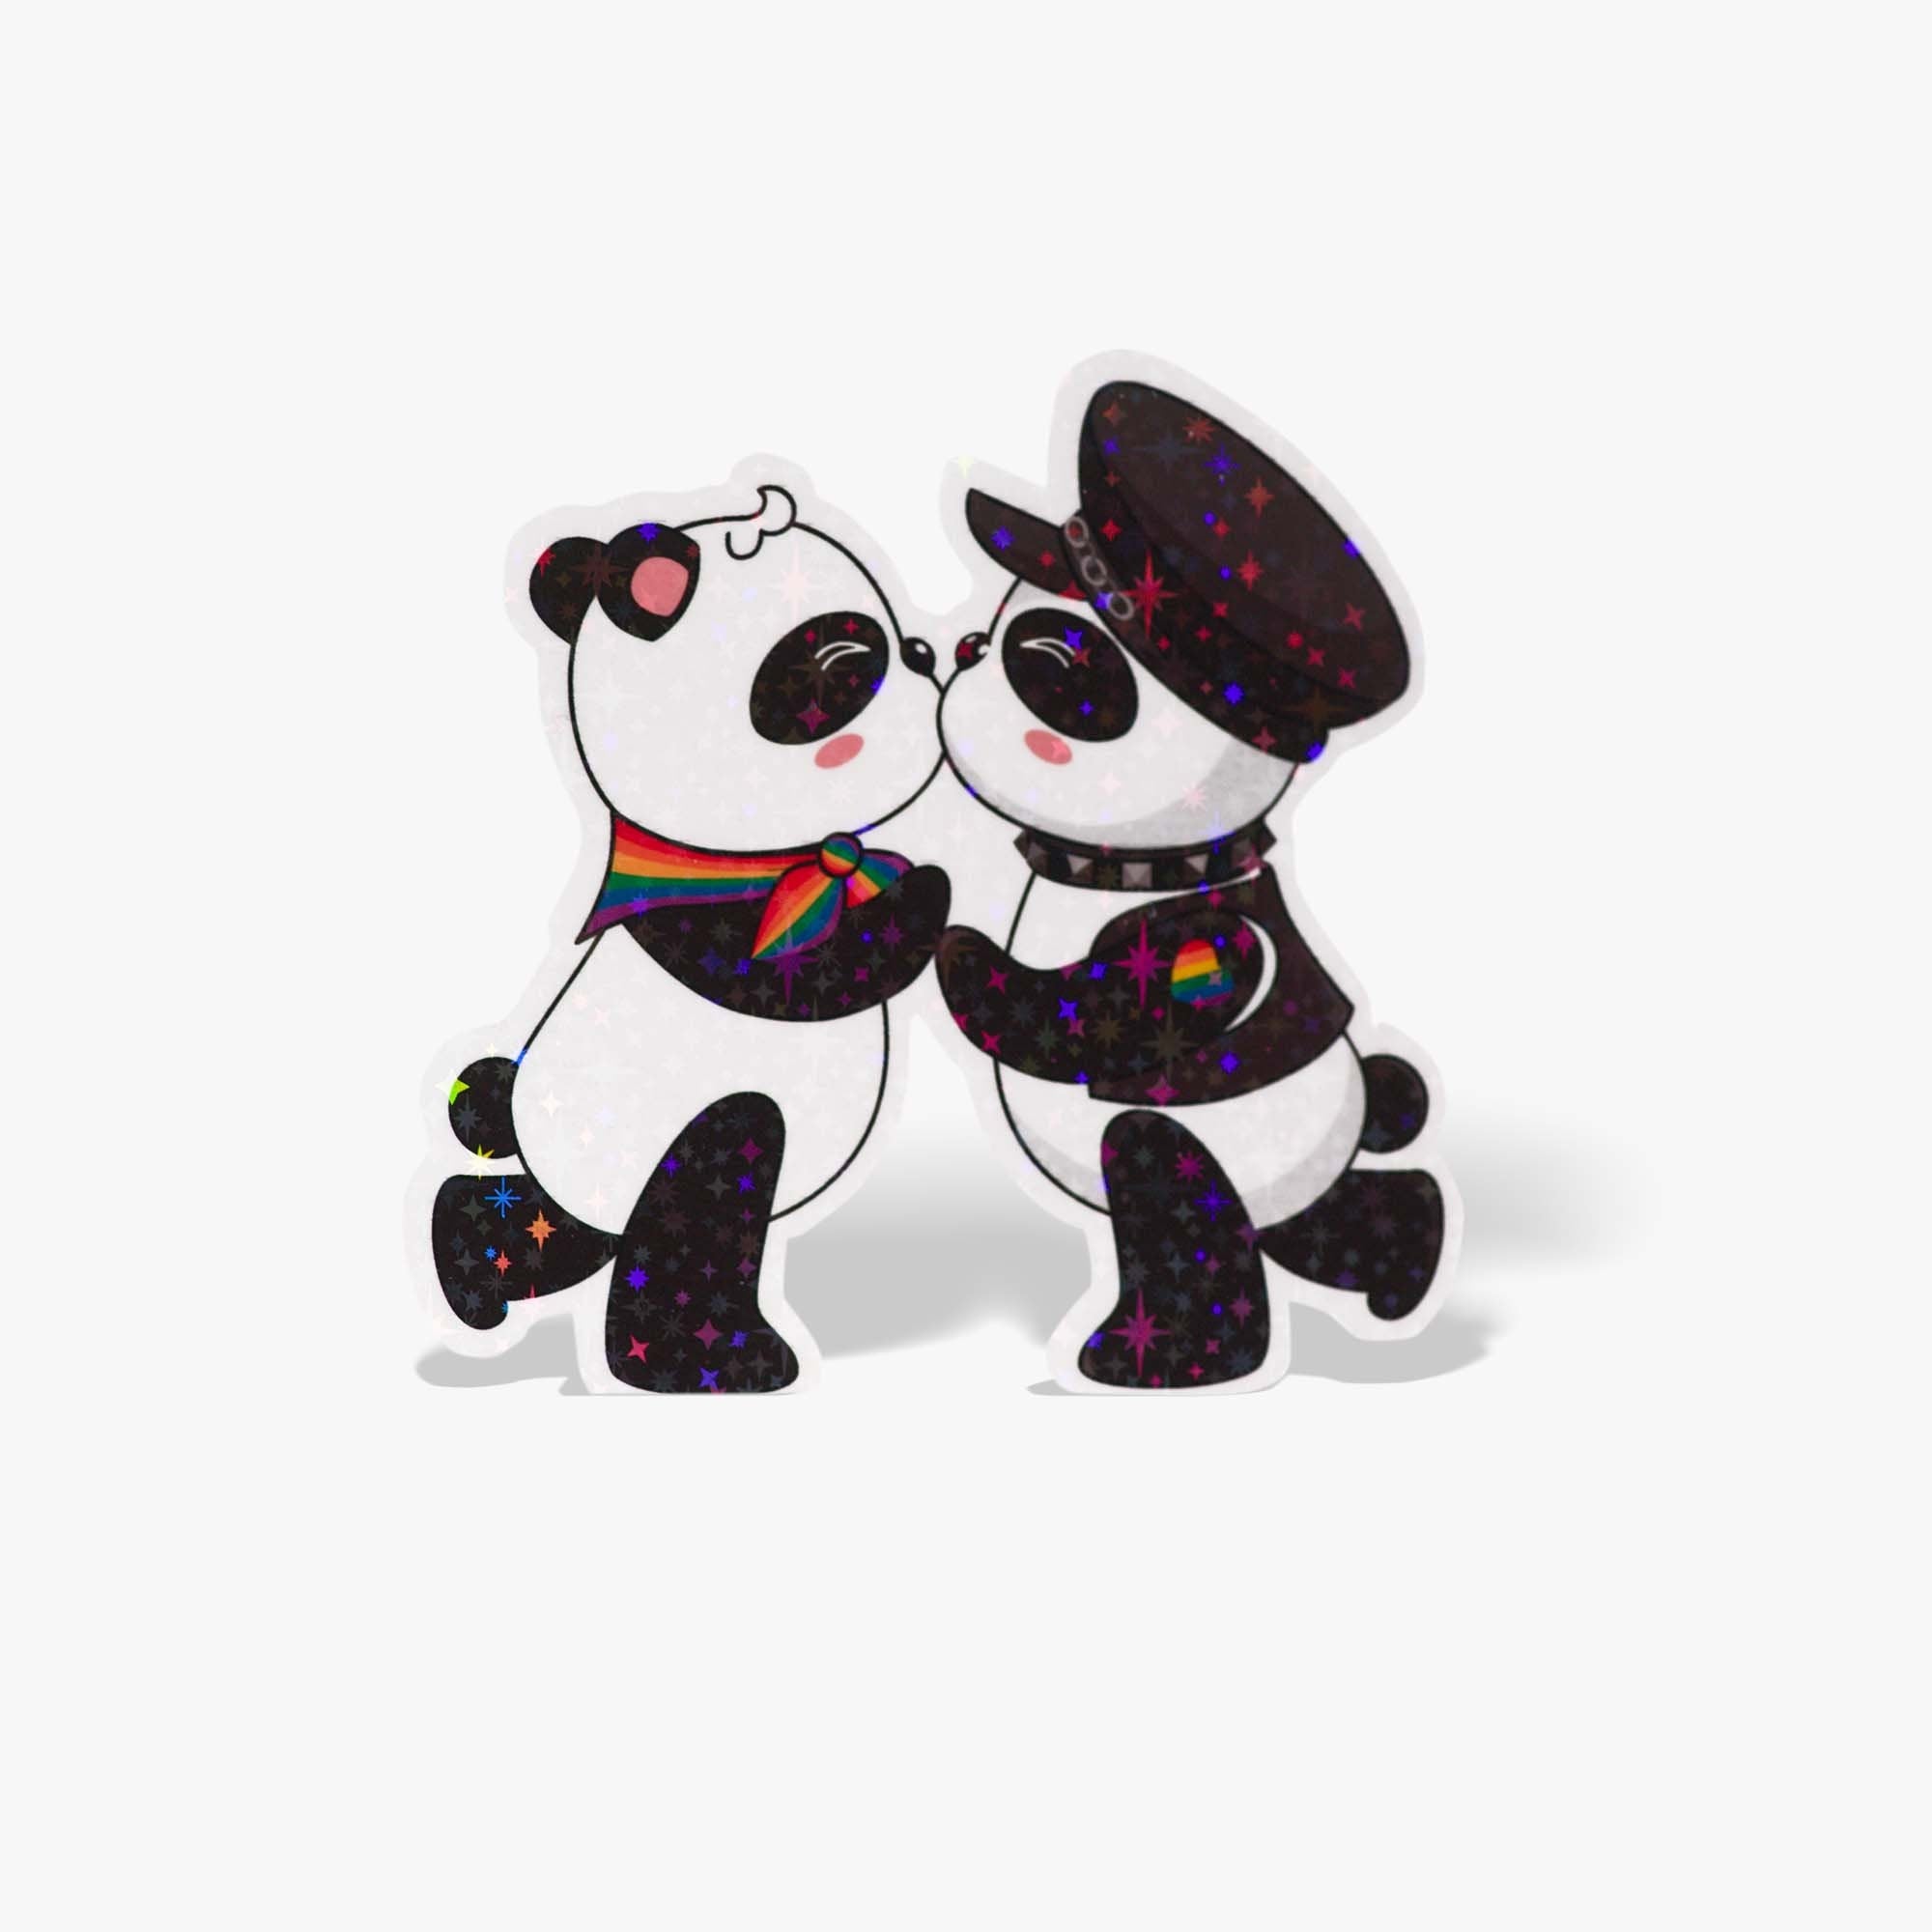 Gay Pride Stickers, Kawaii Panda, Stickers Laptop, Queer Stickers, Gay Cute, Pride Stickers, LGBT stickers, LGBT Gifts, Queer Gift